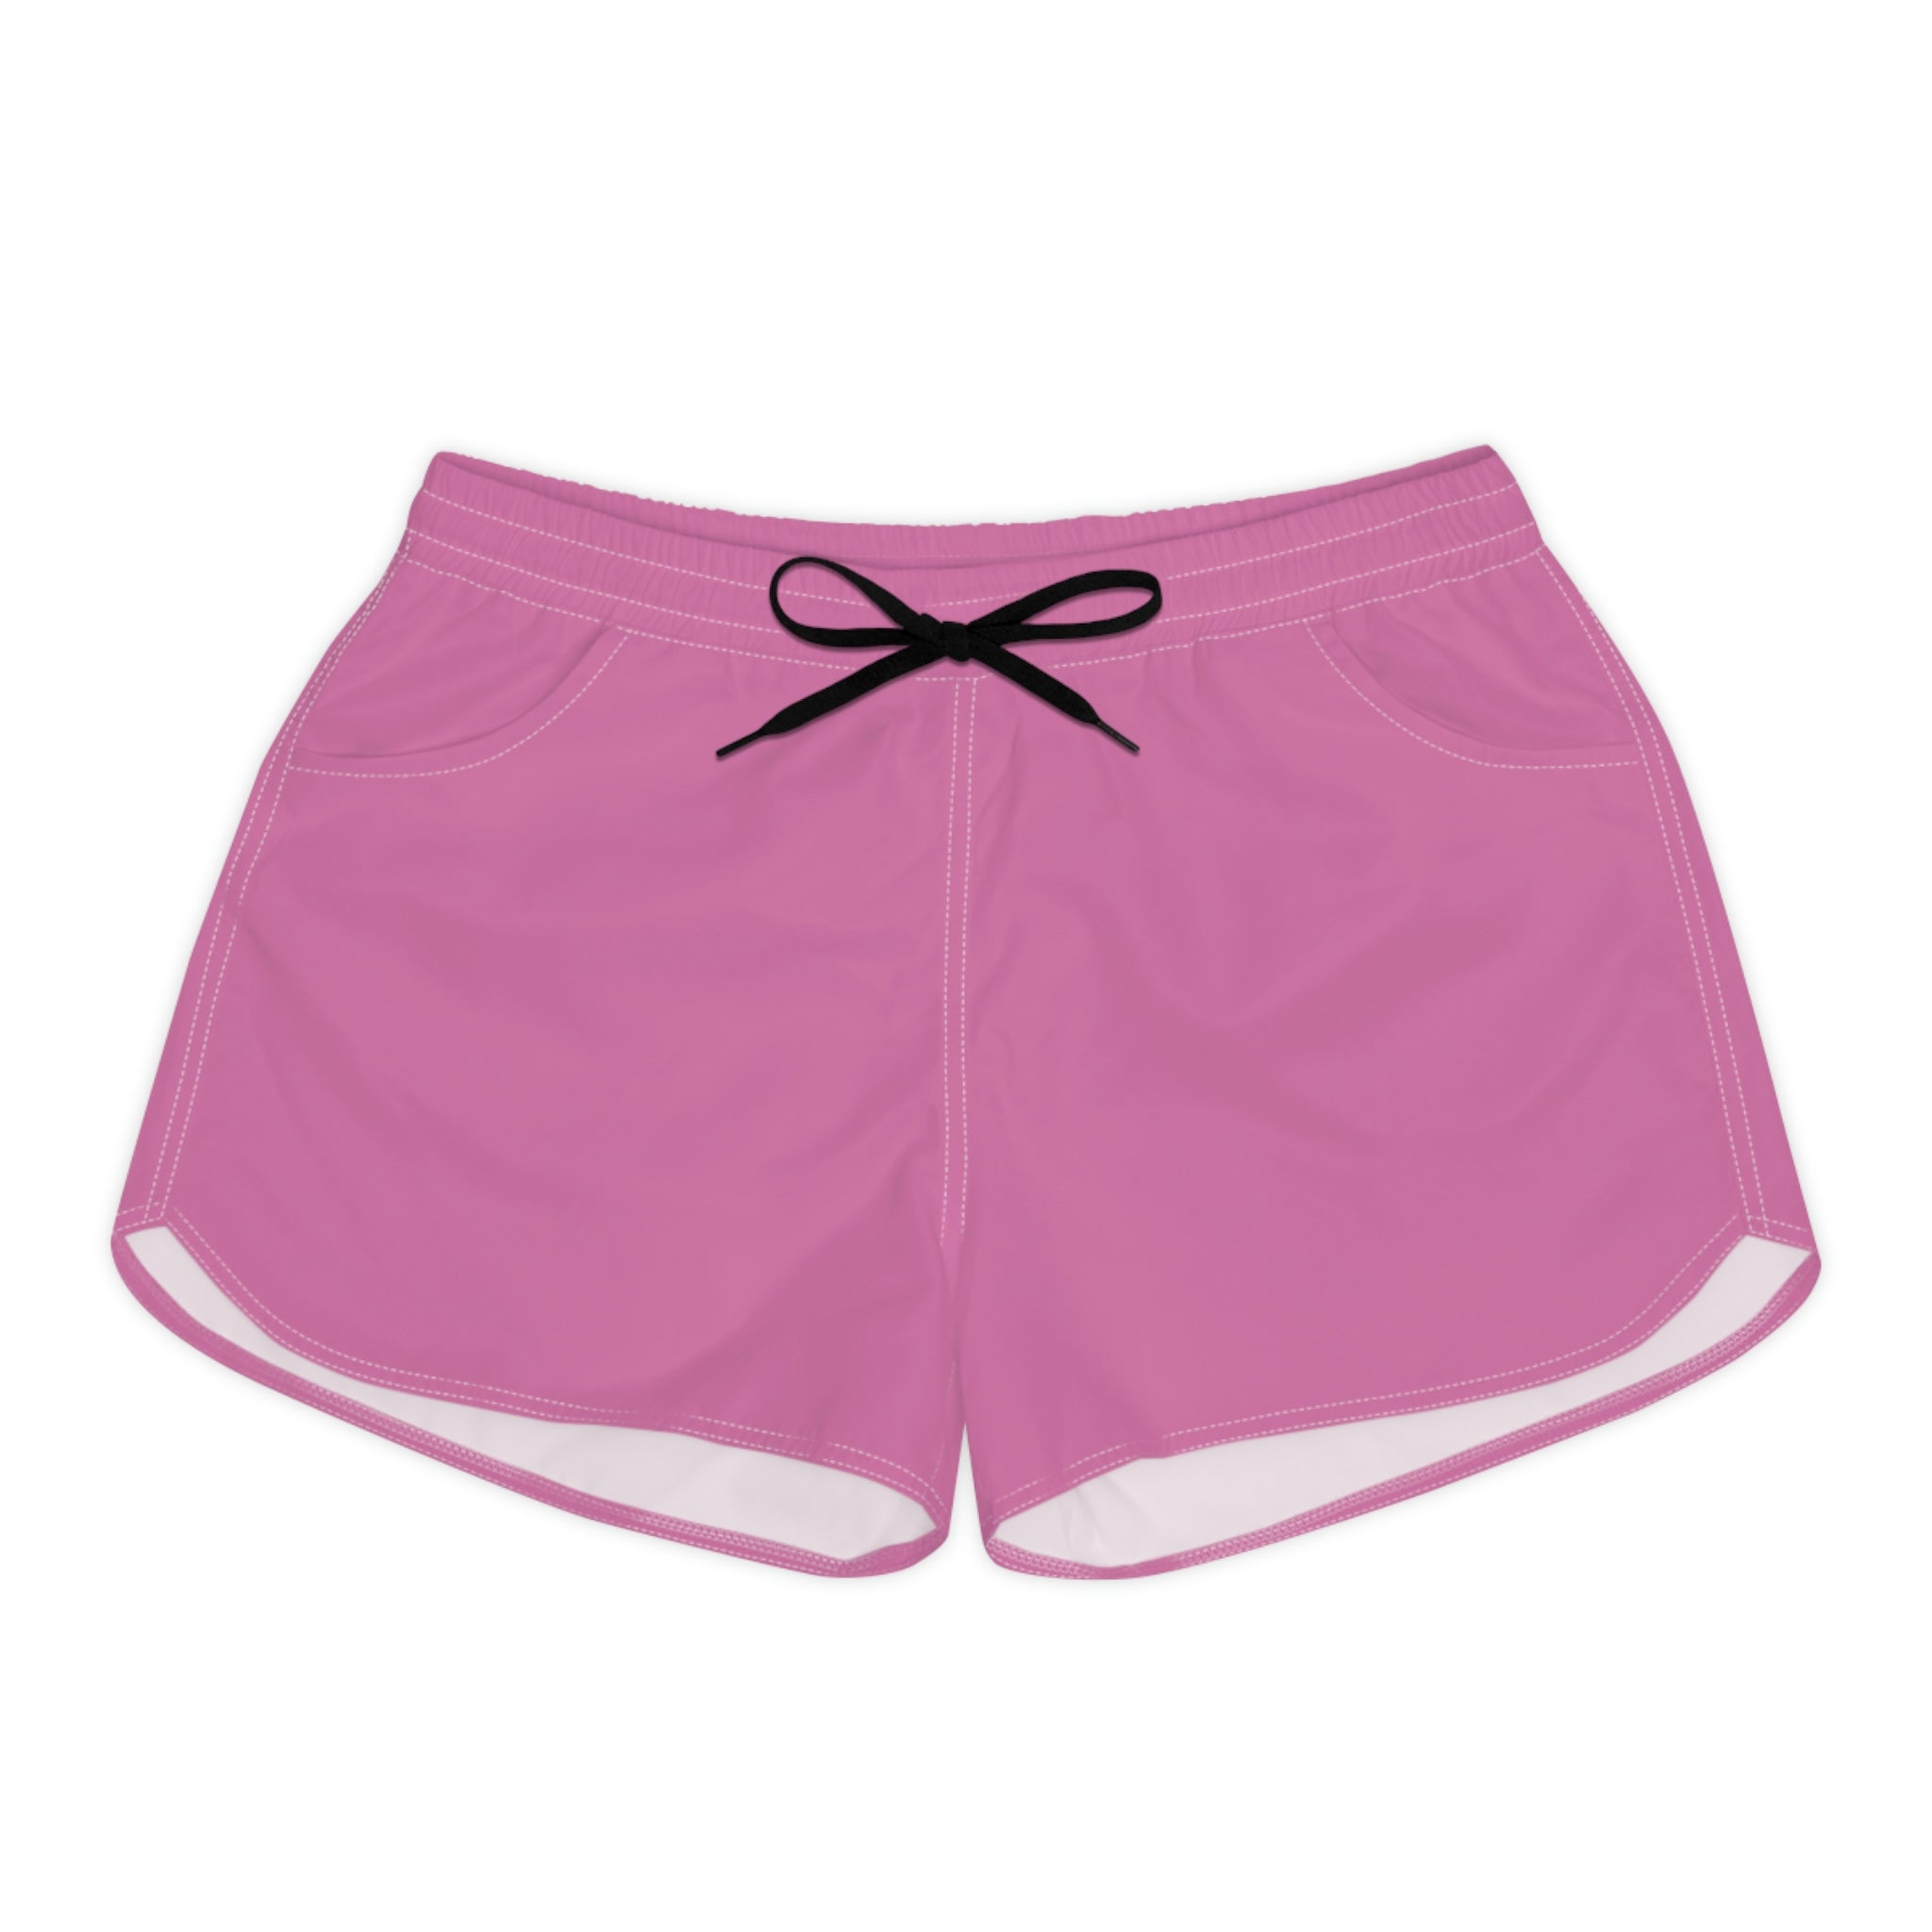 Women's Casual Shorts - Pink - Sunset Harbor Clothing